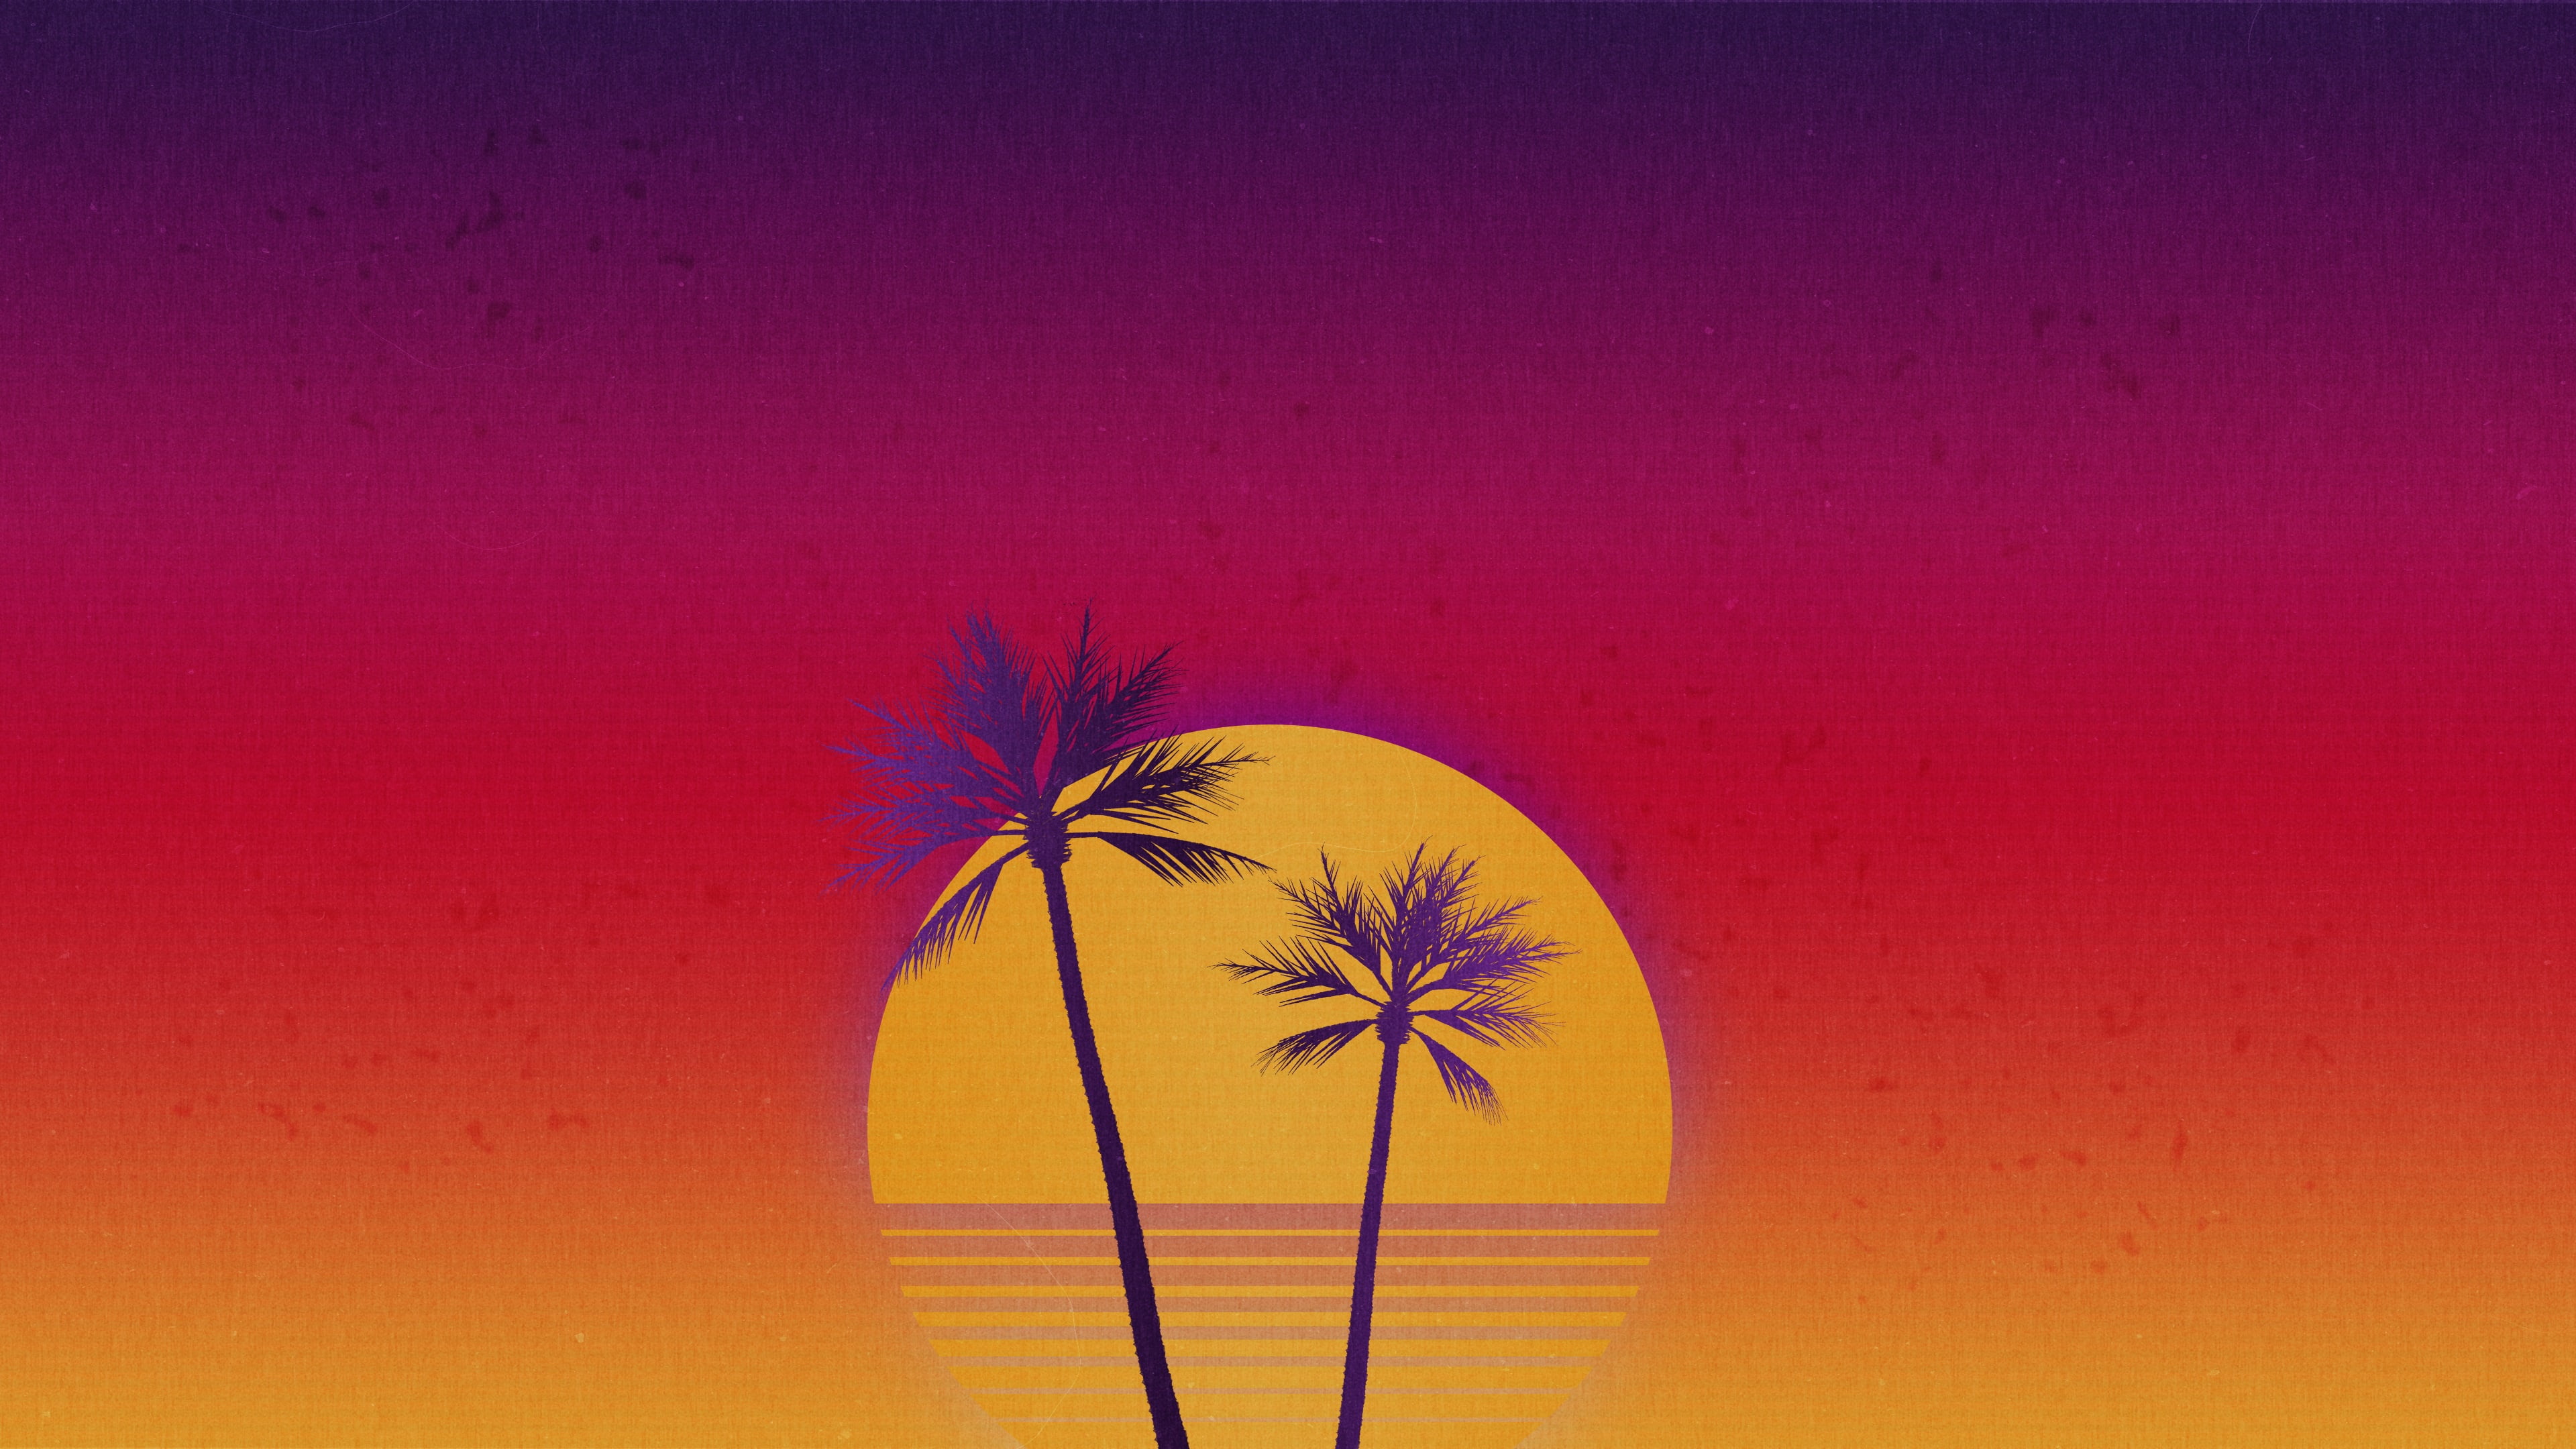 The sun, Music, Style, Palm trees, Background, 80s, Illustration